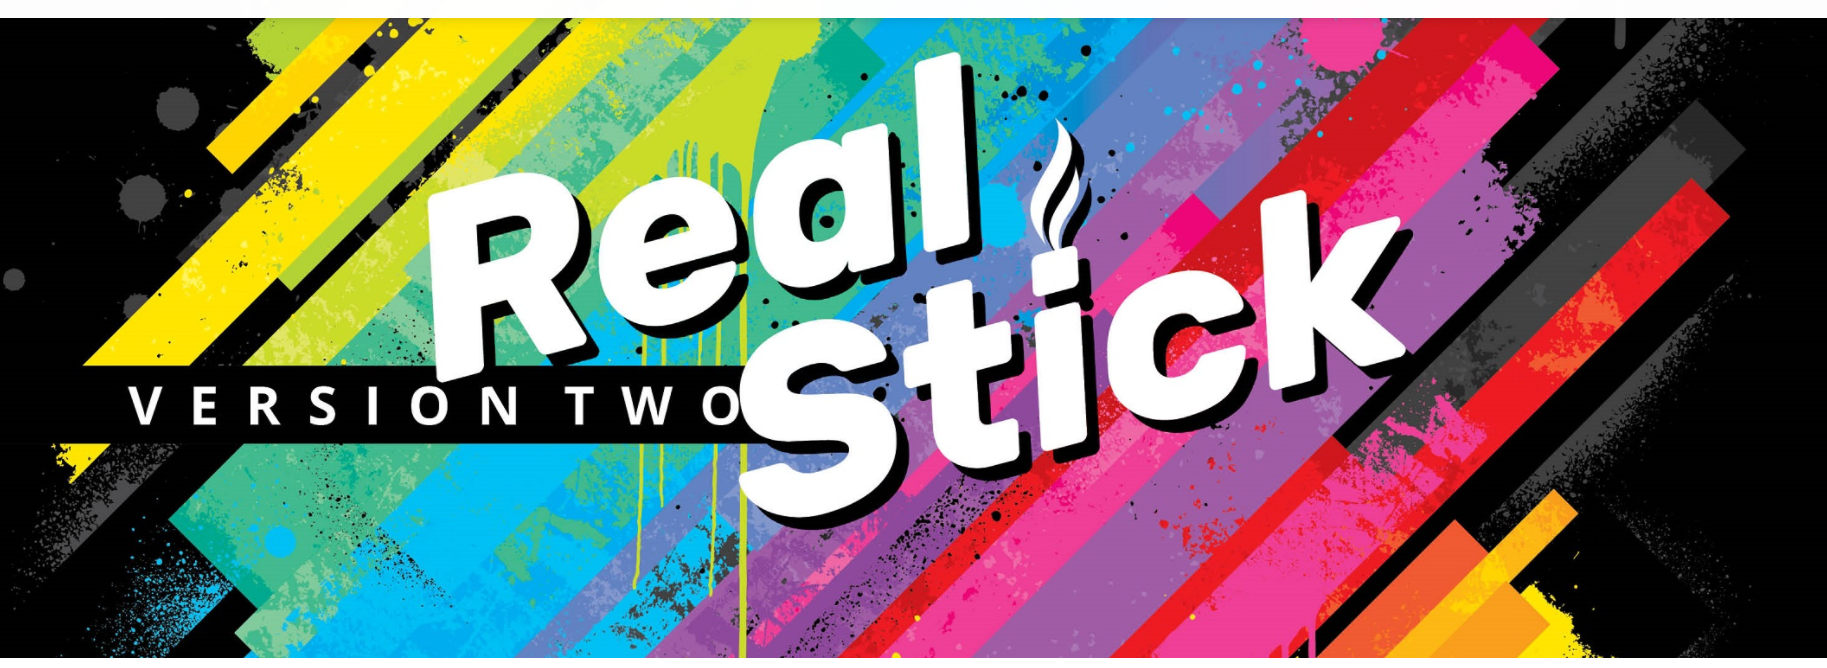 Real Stick 2 Rechargeable Disposable Vape 5mL 650mAh